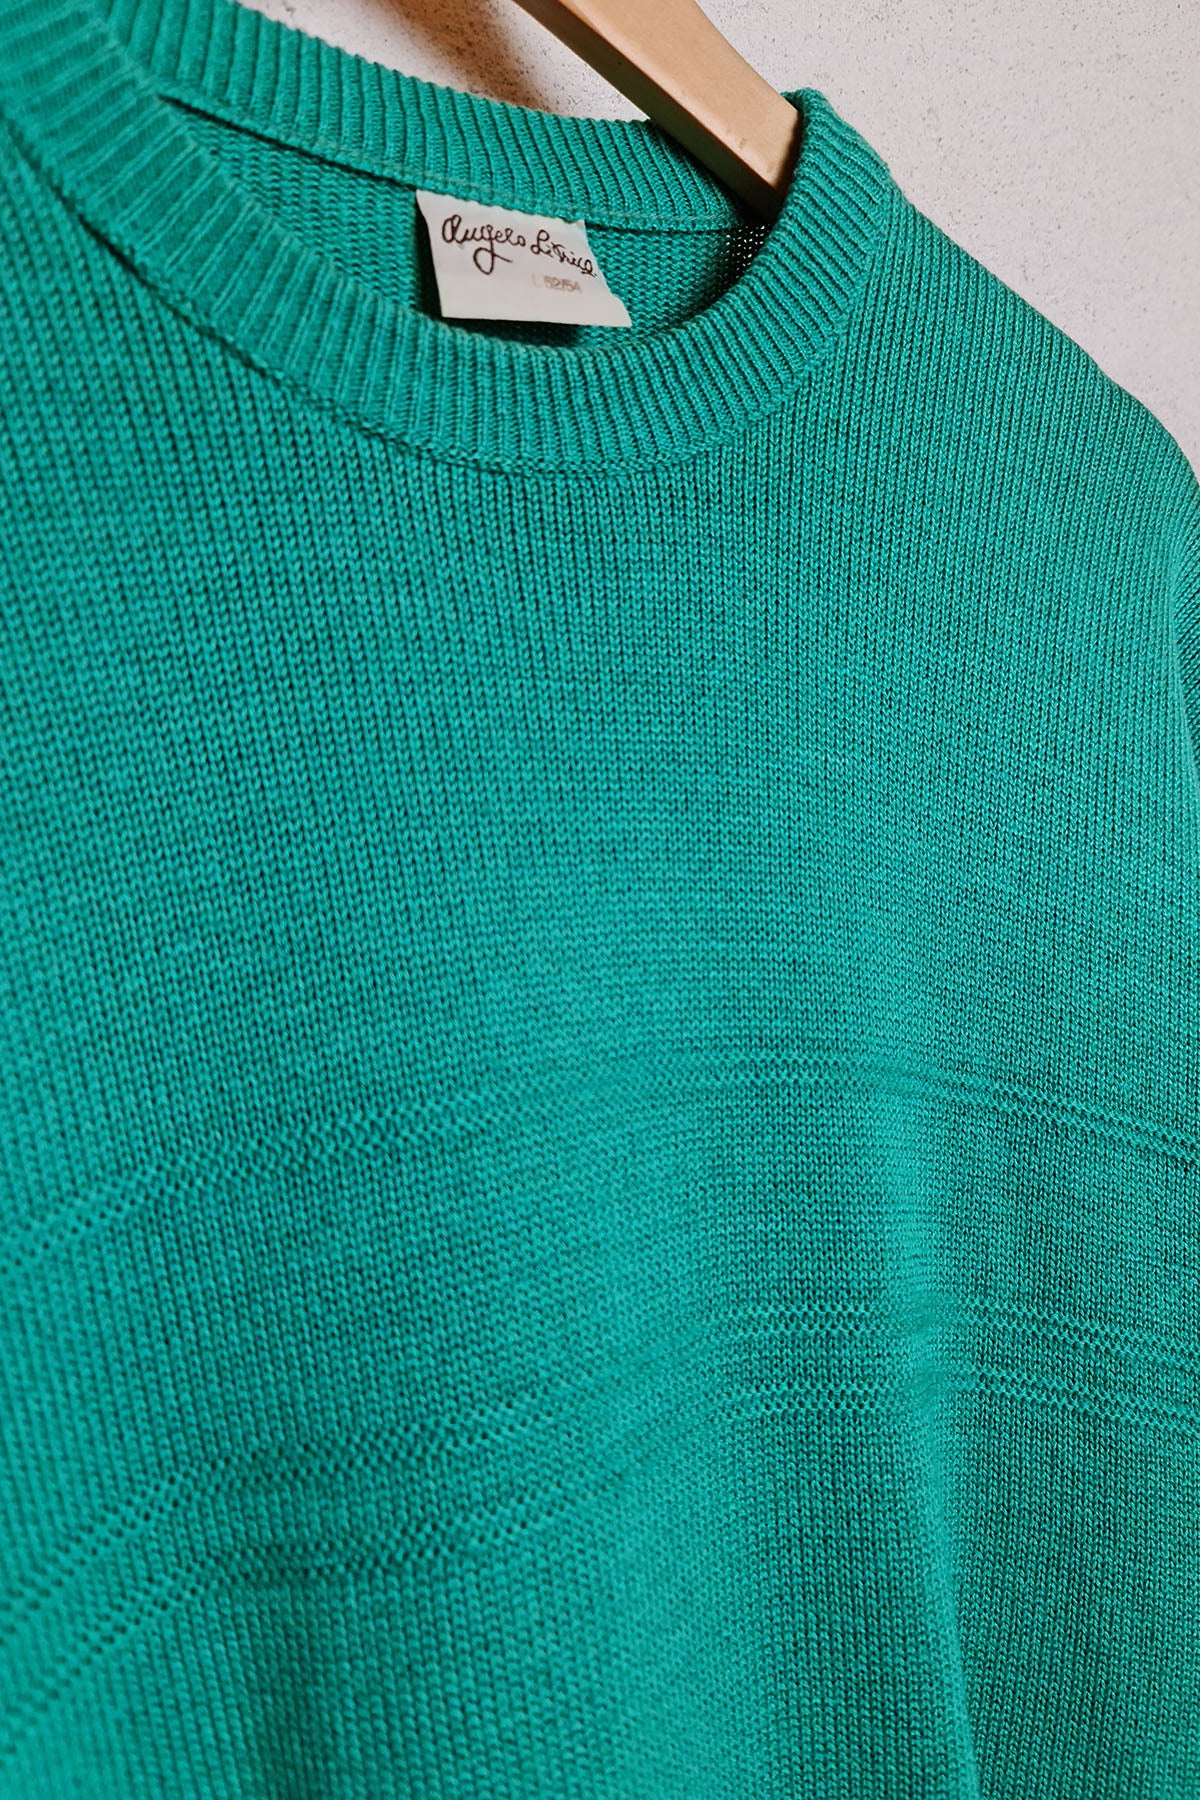 Bright Turquoise Vintage Pullover